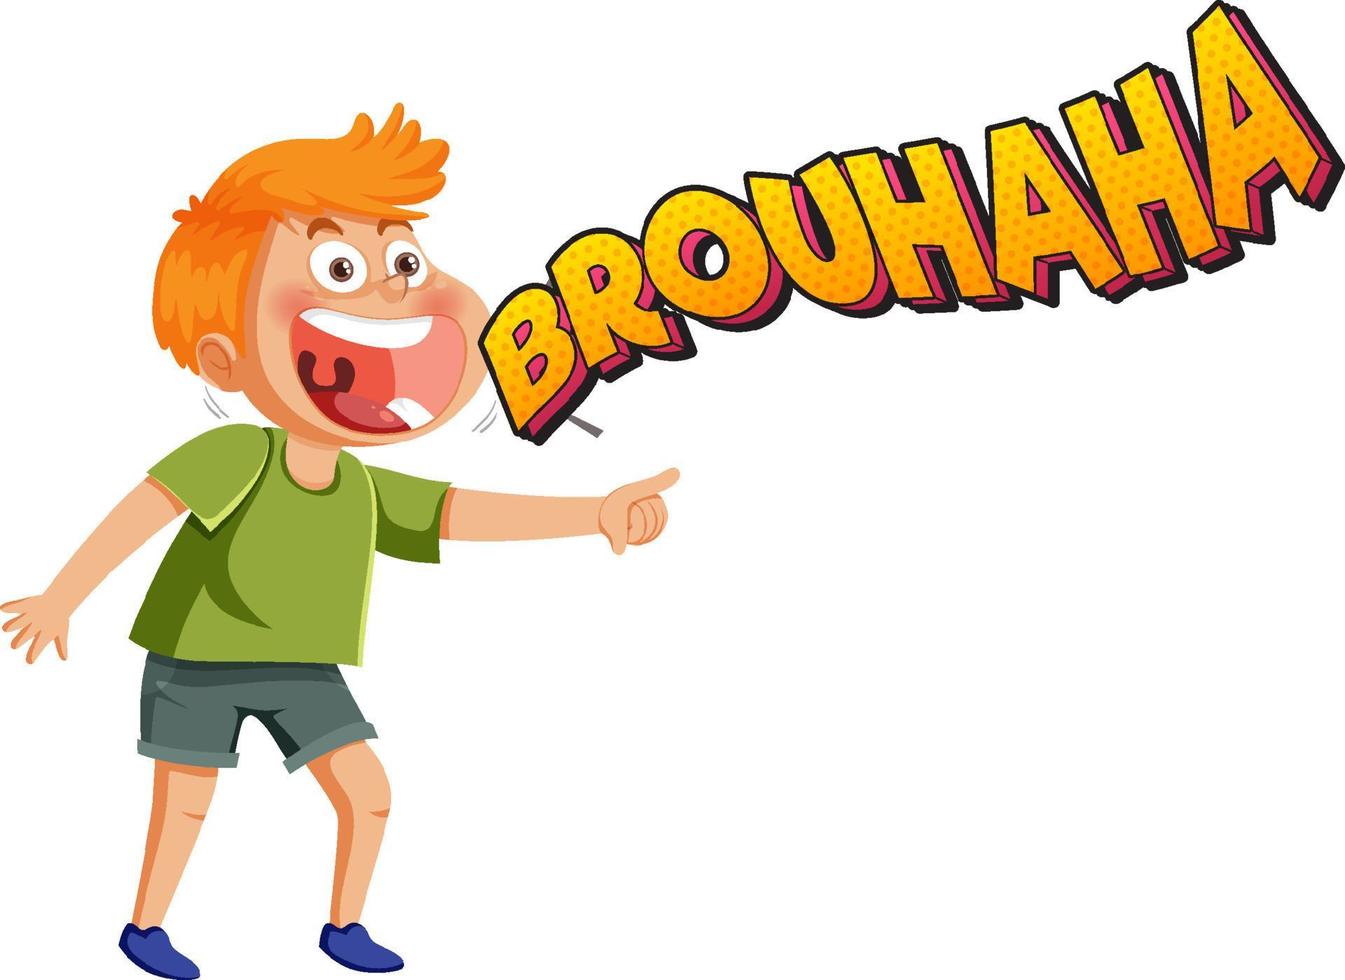 A boy laughing with brouhaha word lext vector